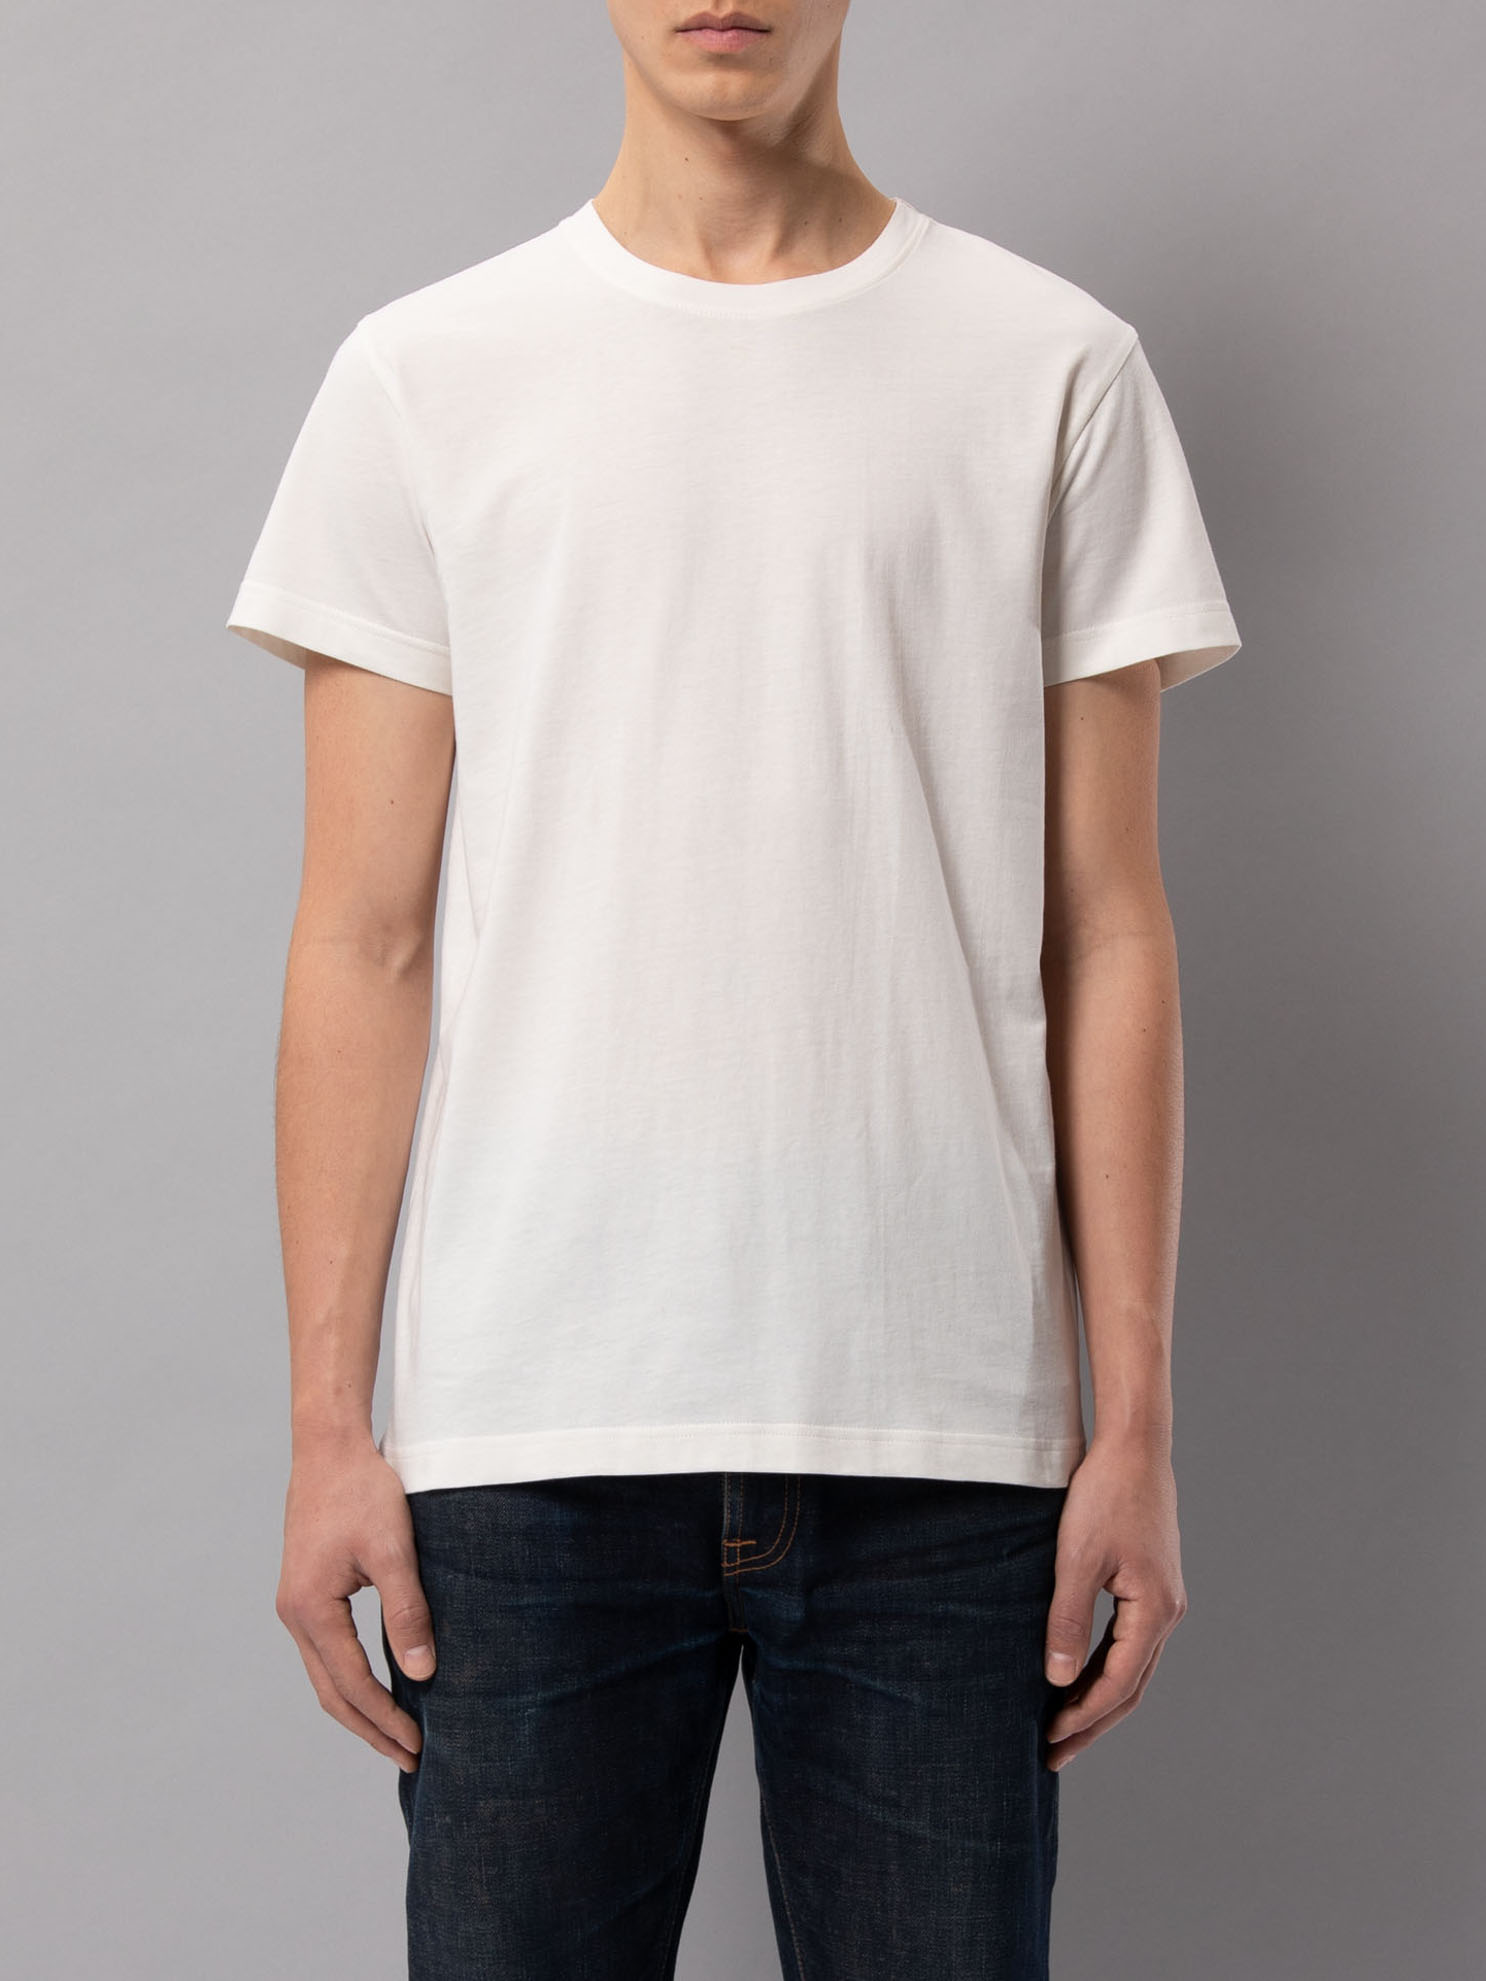 Nudie Jeans - CREW NECK TEE - Offwhite